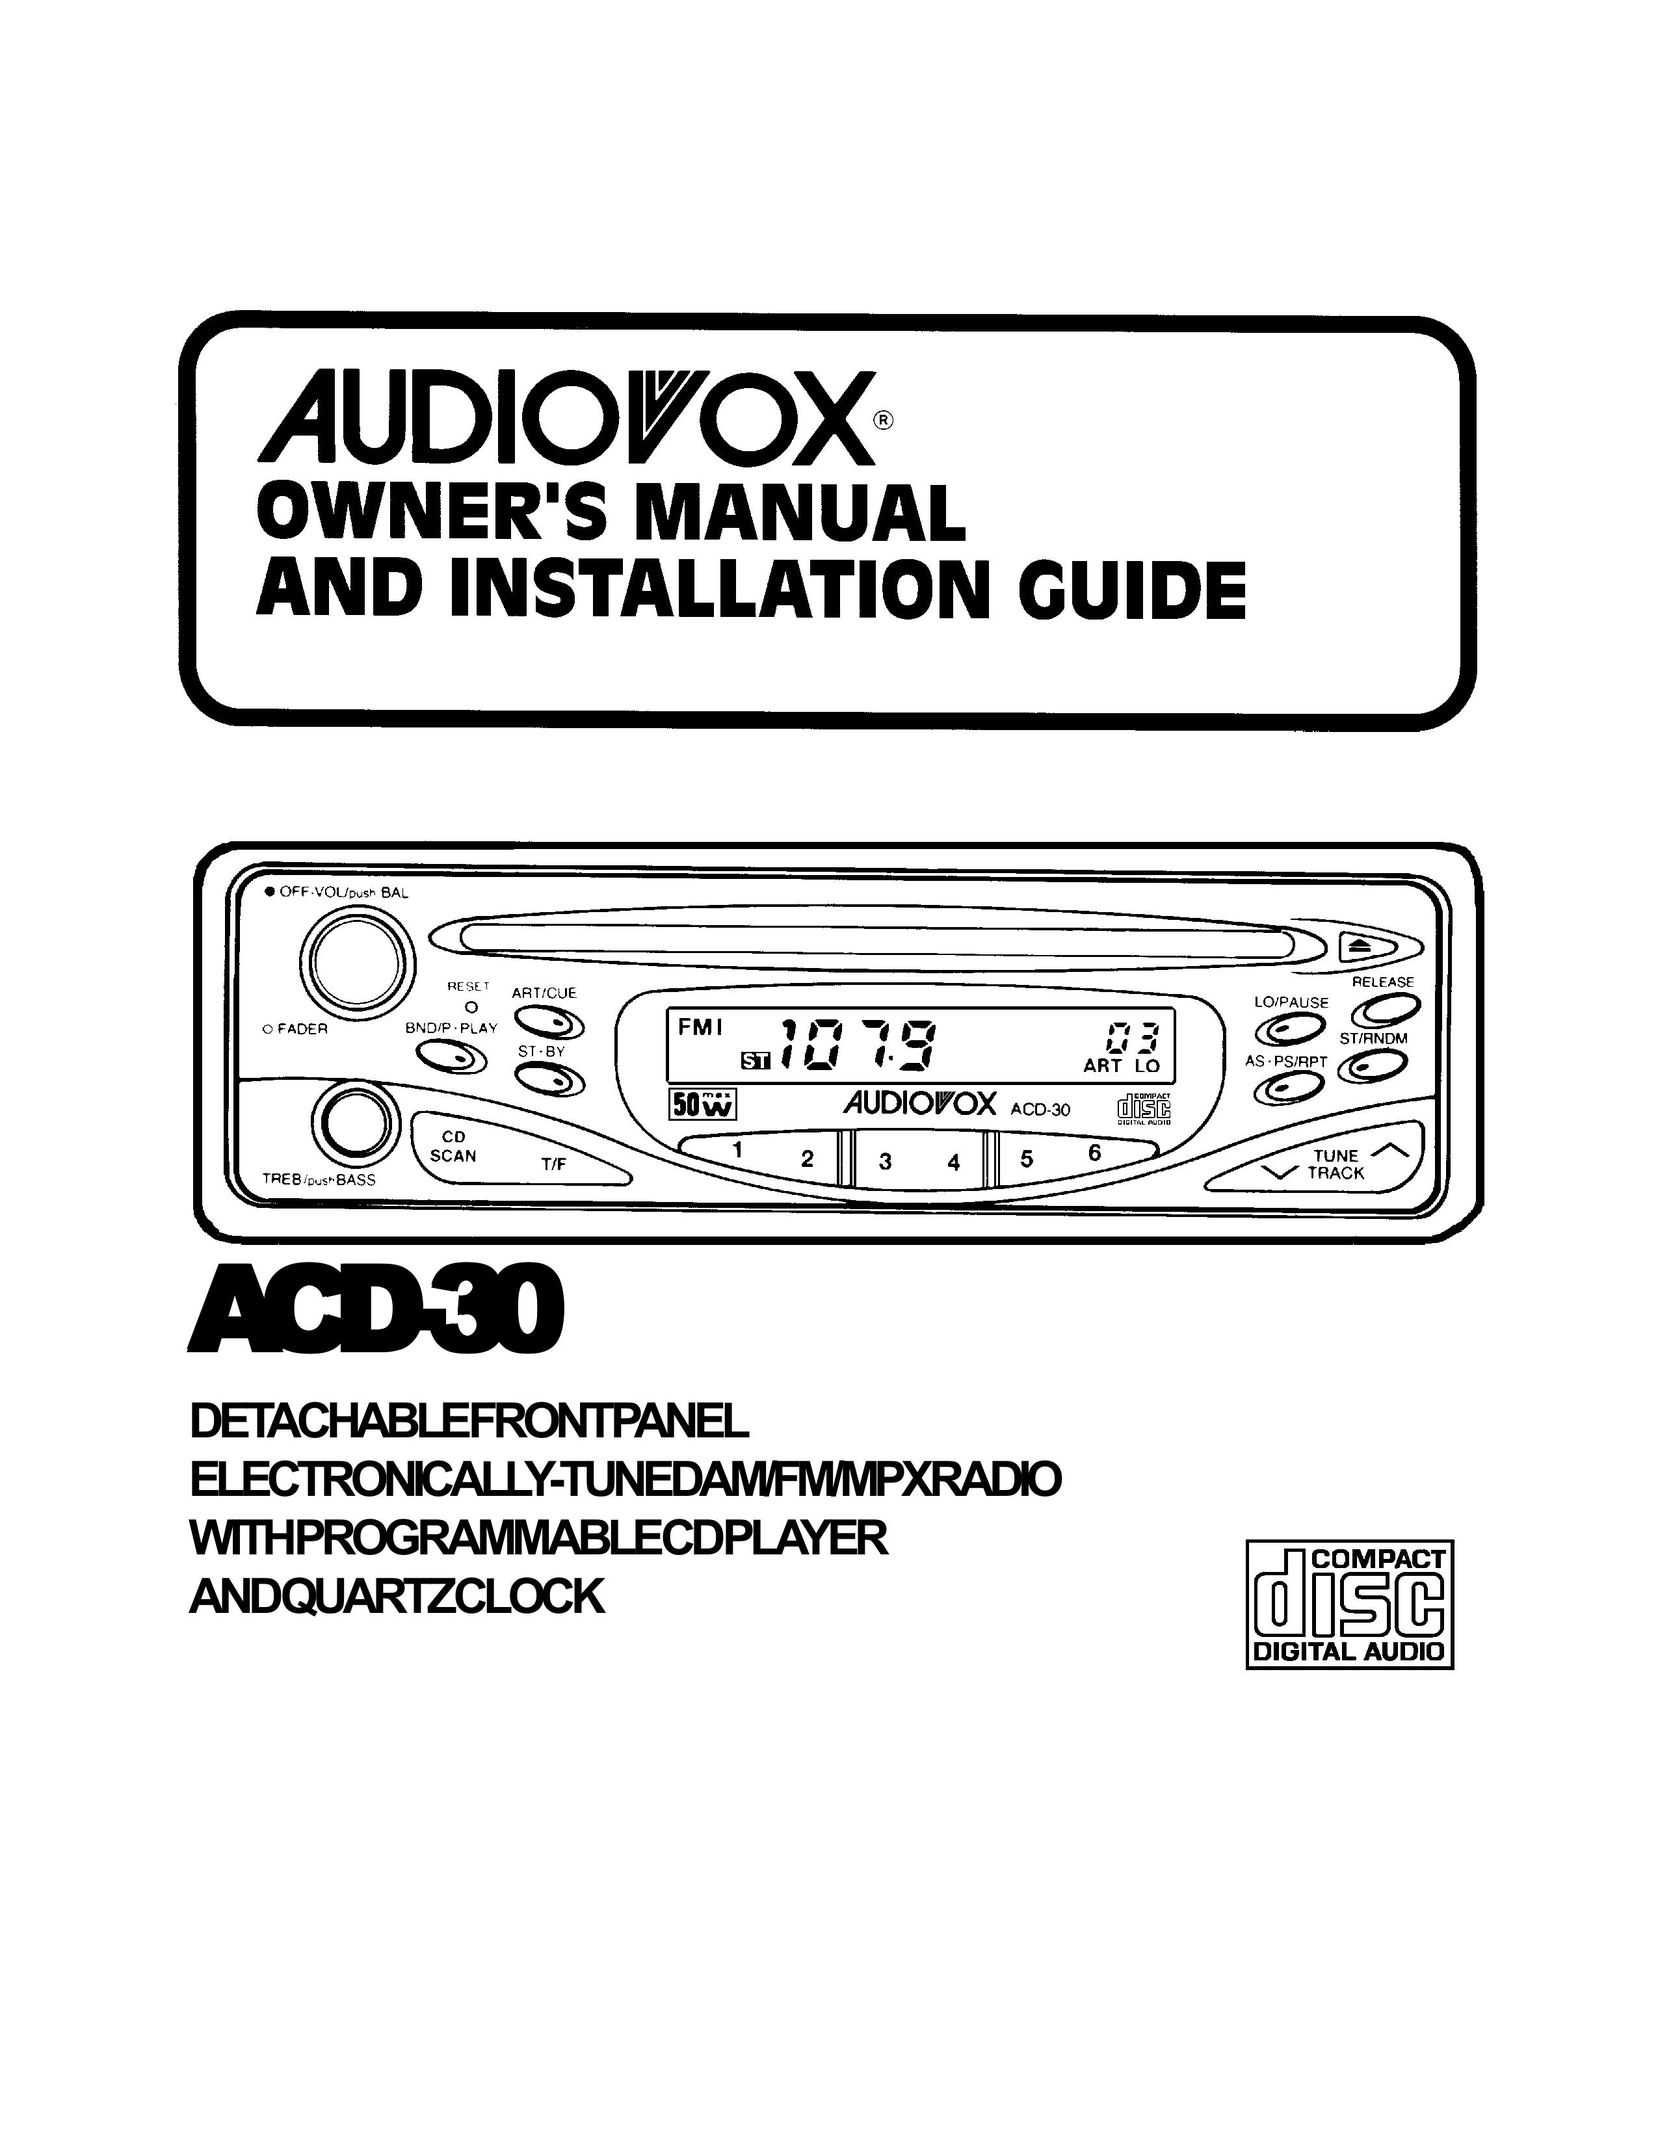 Audiovox ACD-30 Stereo System User Manual